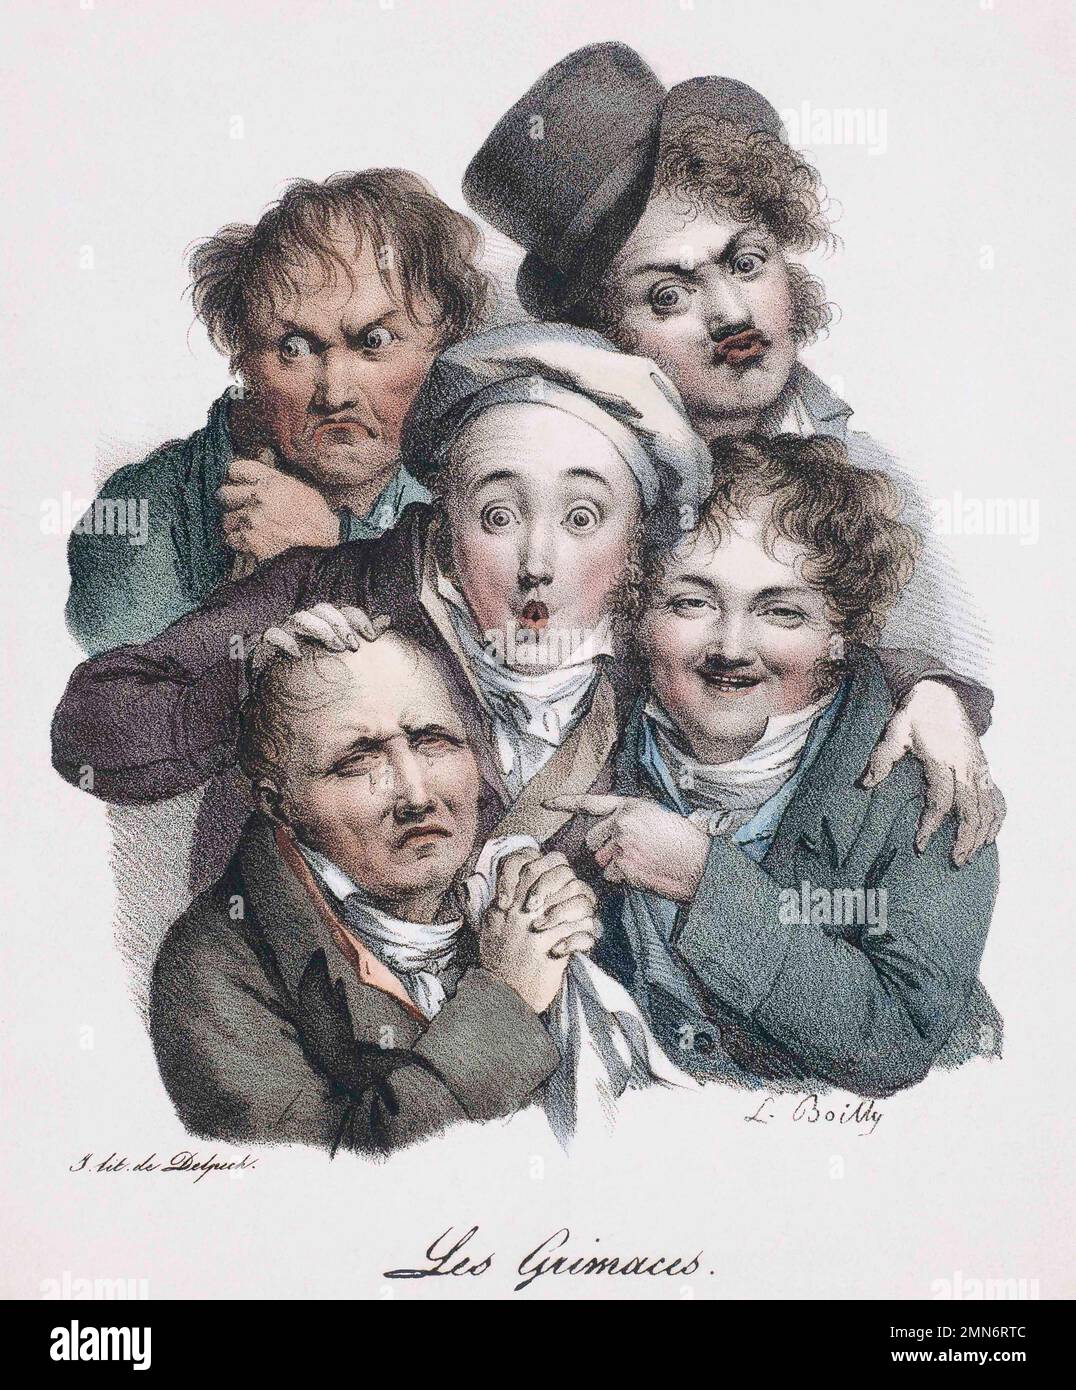 The Grimaces.  Different human facial expressions: surprise, sadness, anger etc.  After a work by Louis Boilly. Stock Photo